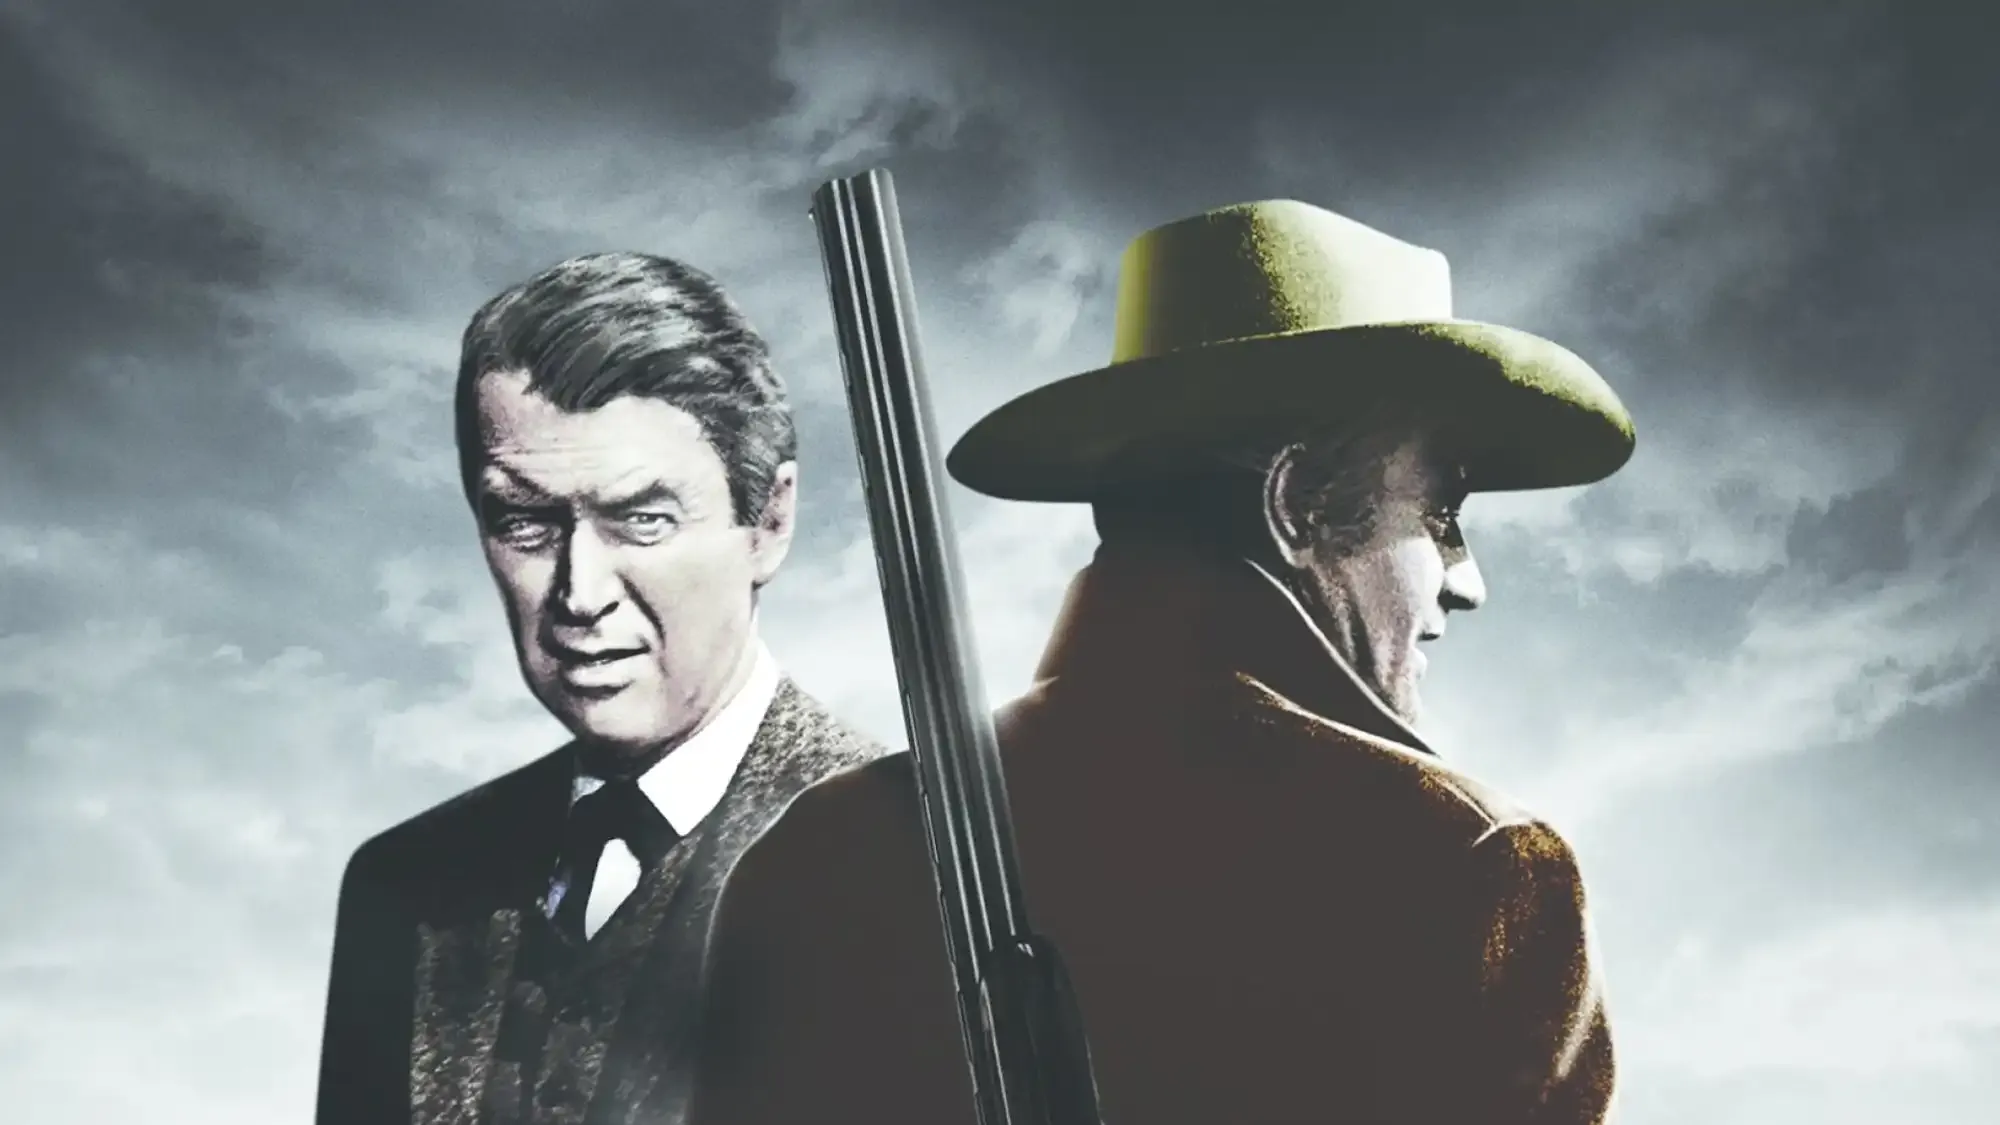 The Man Who Shot Liberty Valance movie review